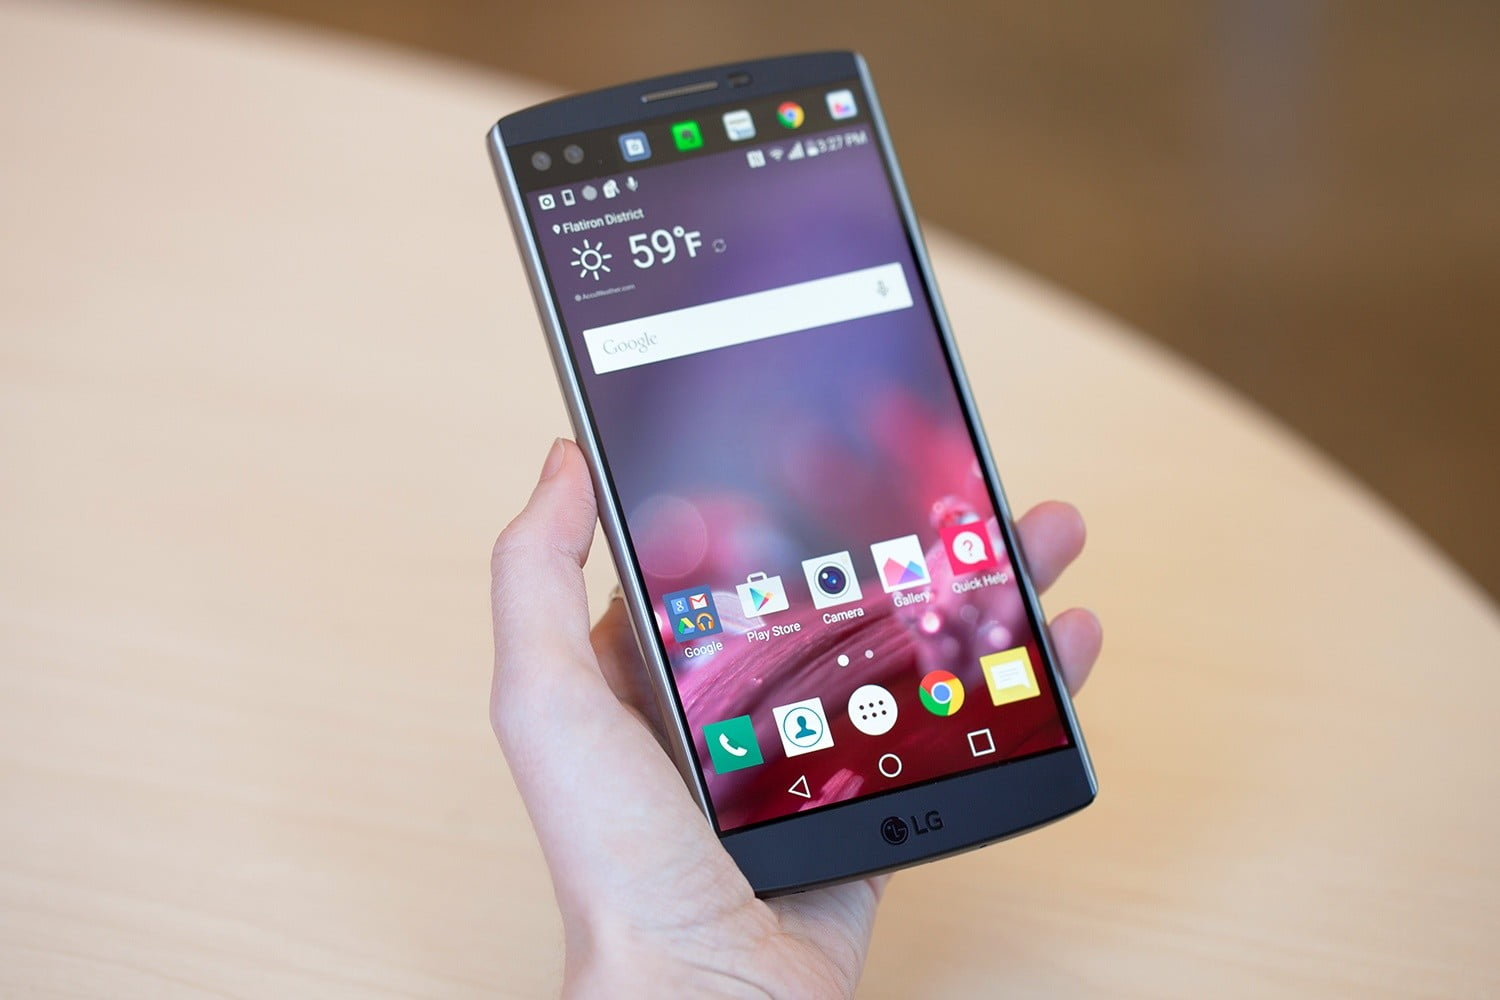 LG V10: 7 Common Problems, and How to Fix Them.